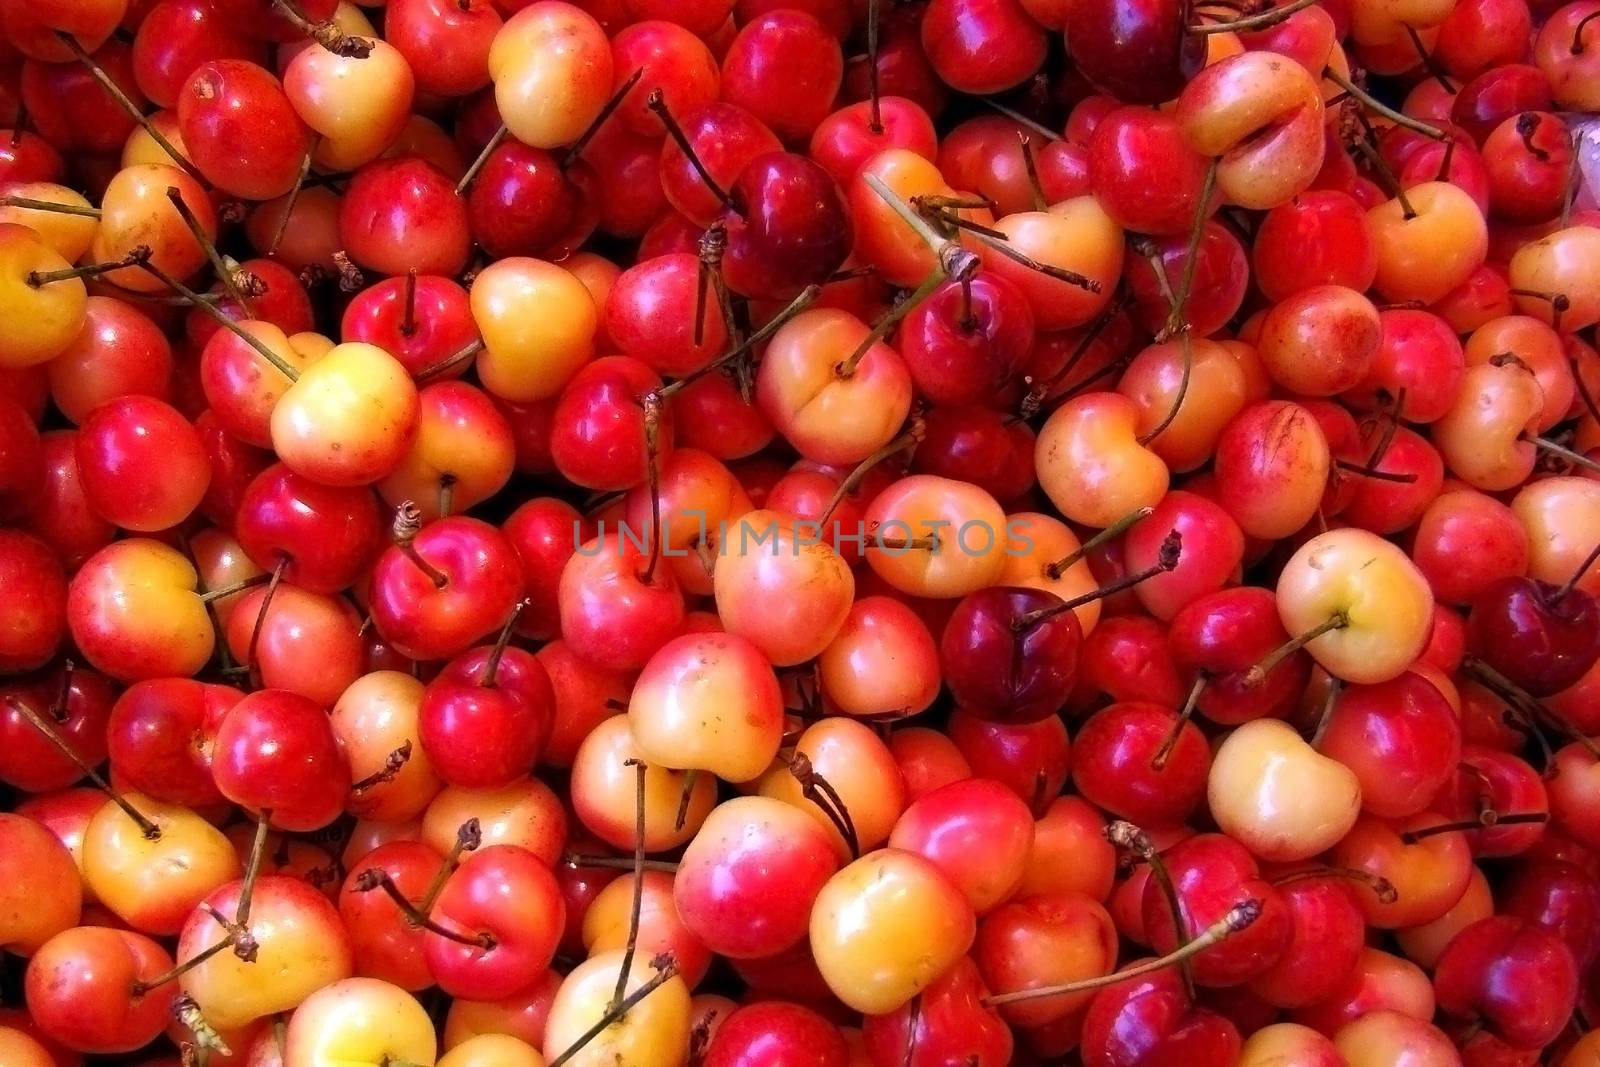 fresh picked cherries by hicster